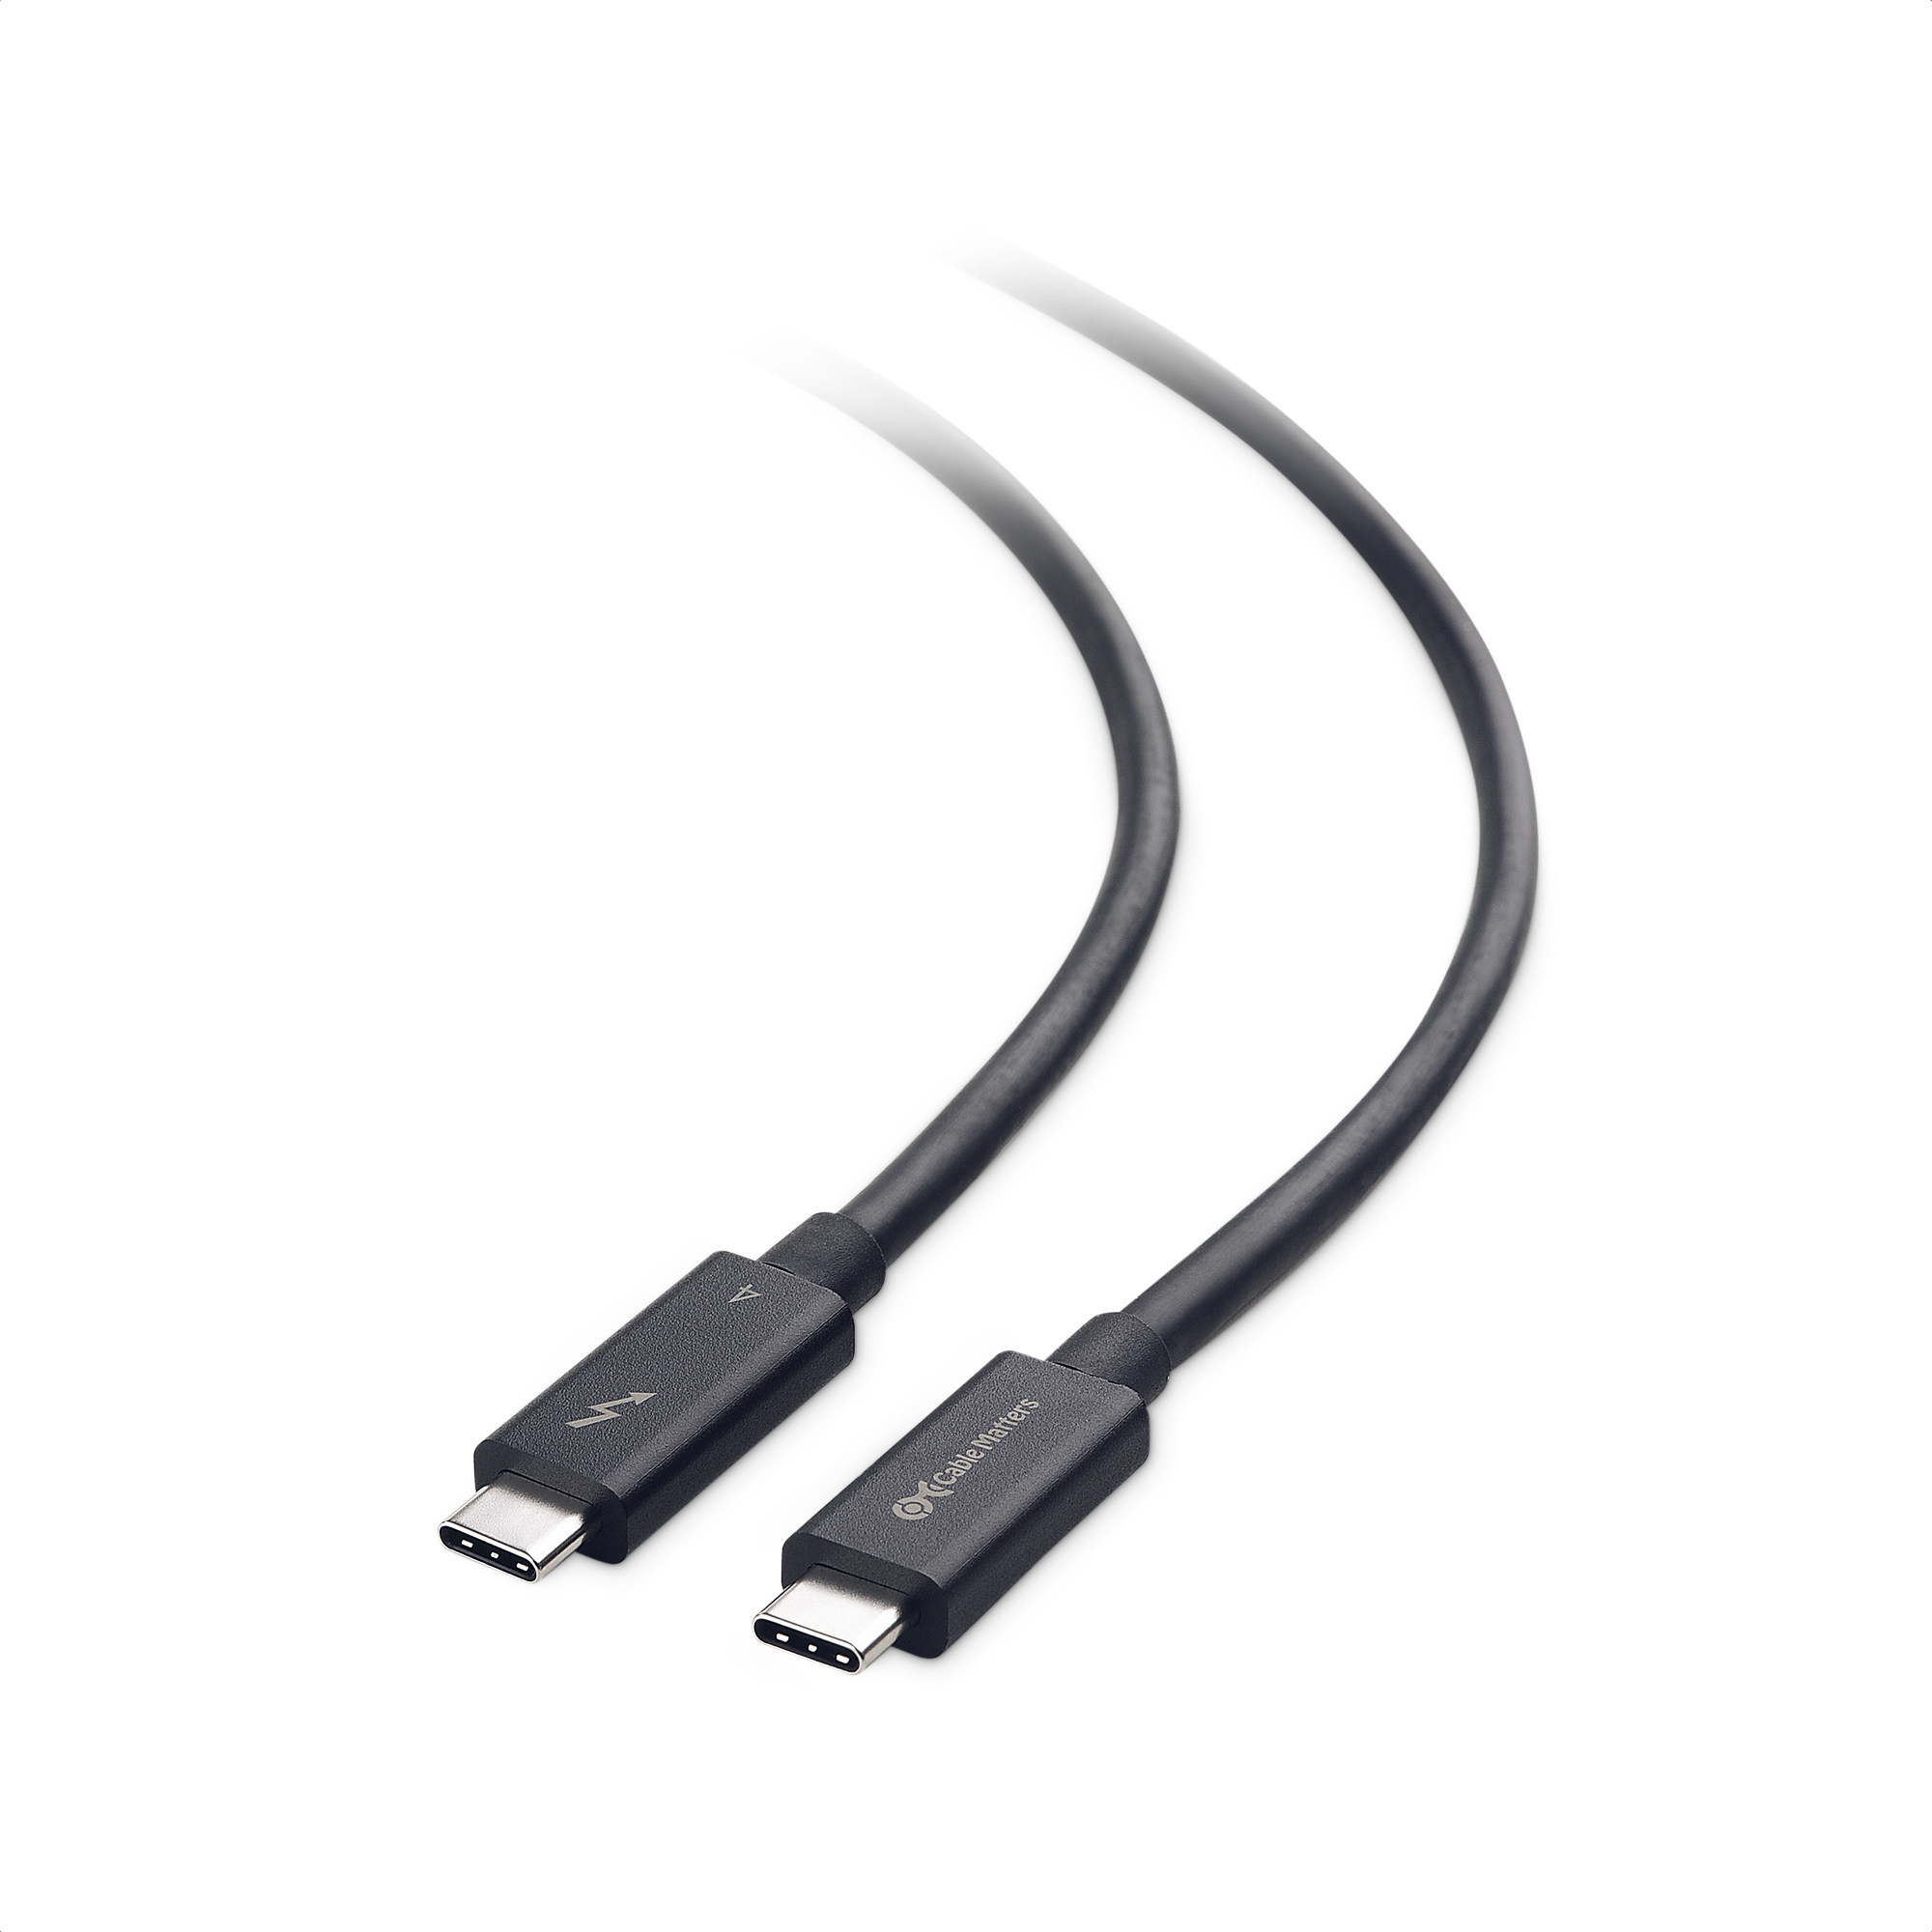 Cable Matters Launches First Thunderbolt™ 4 Cable in a 6.6-Foot Length